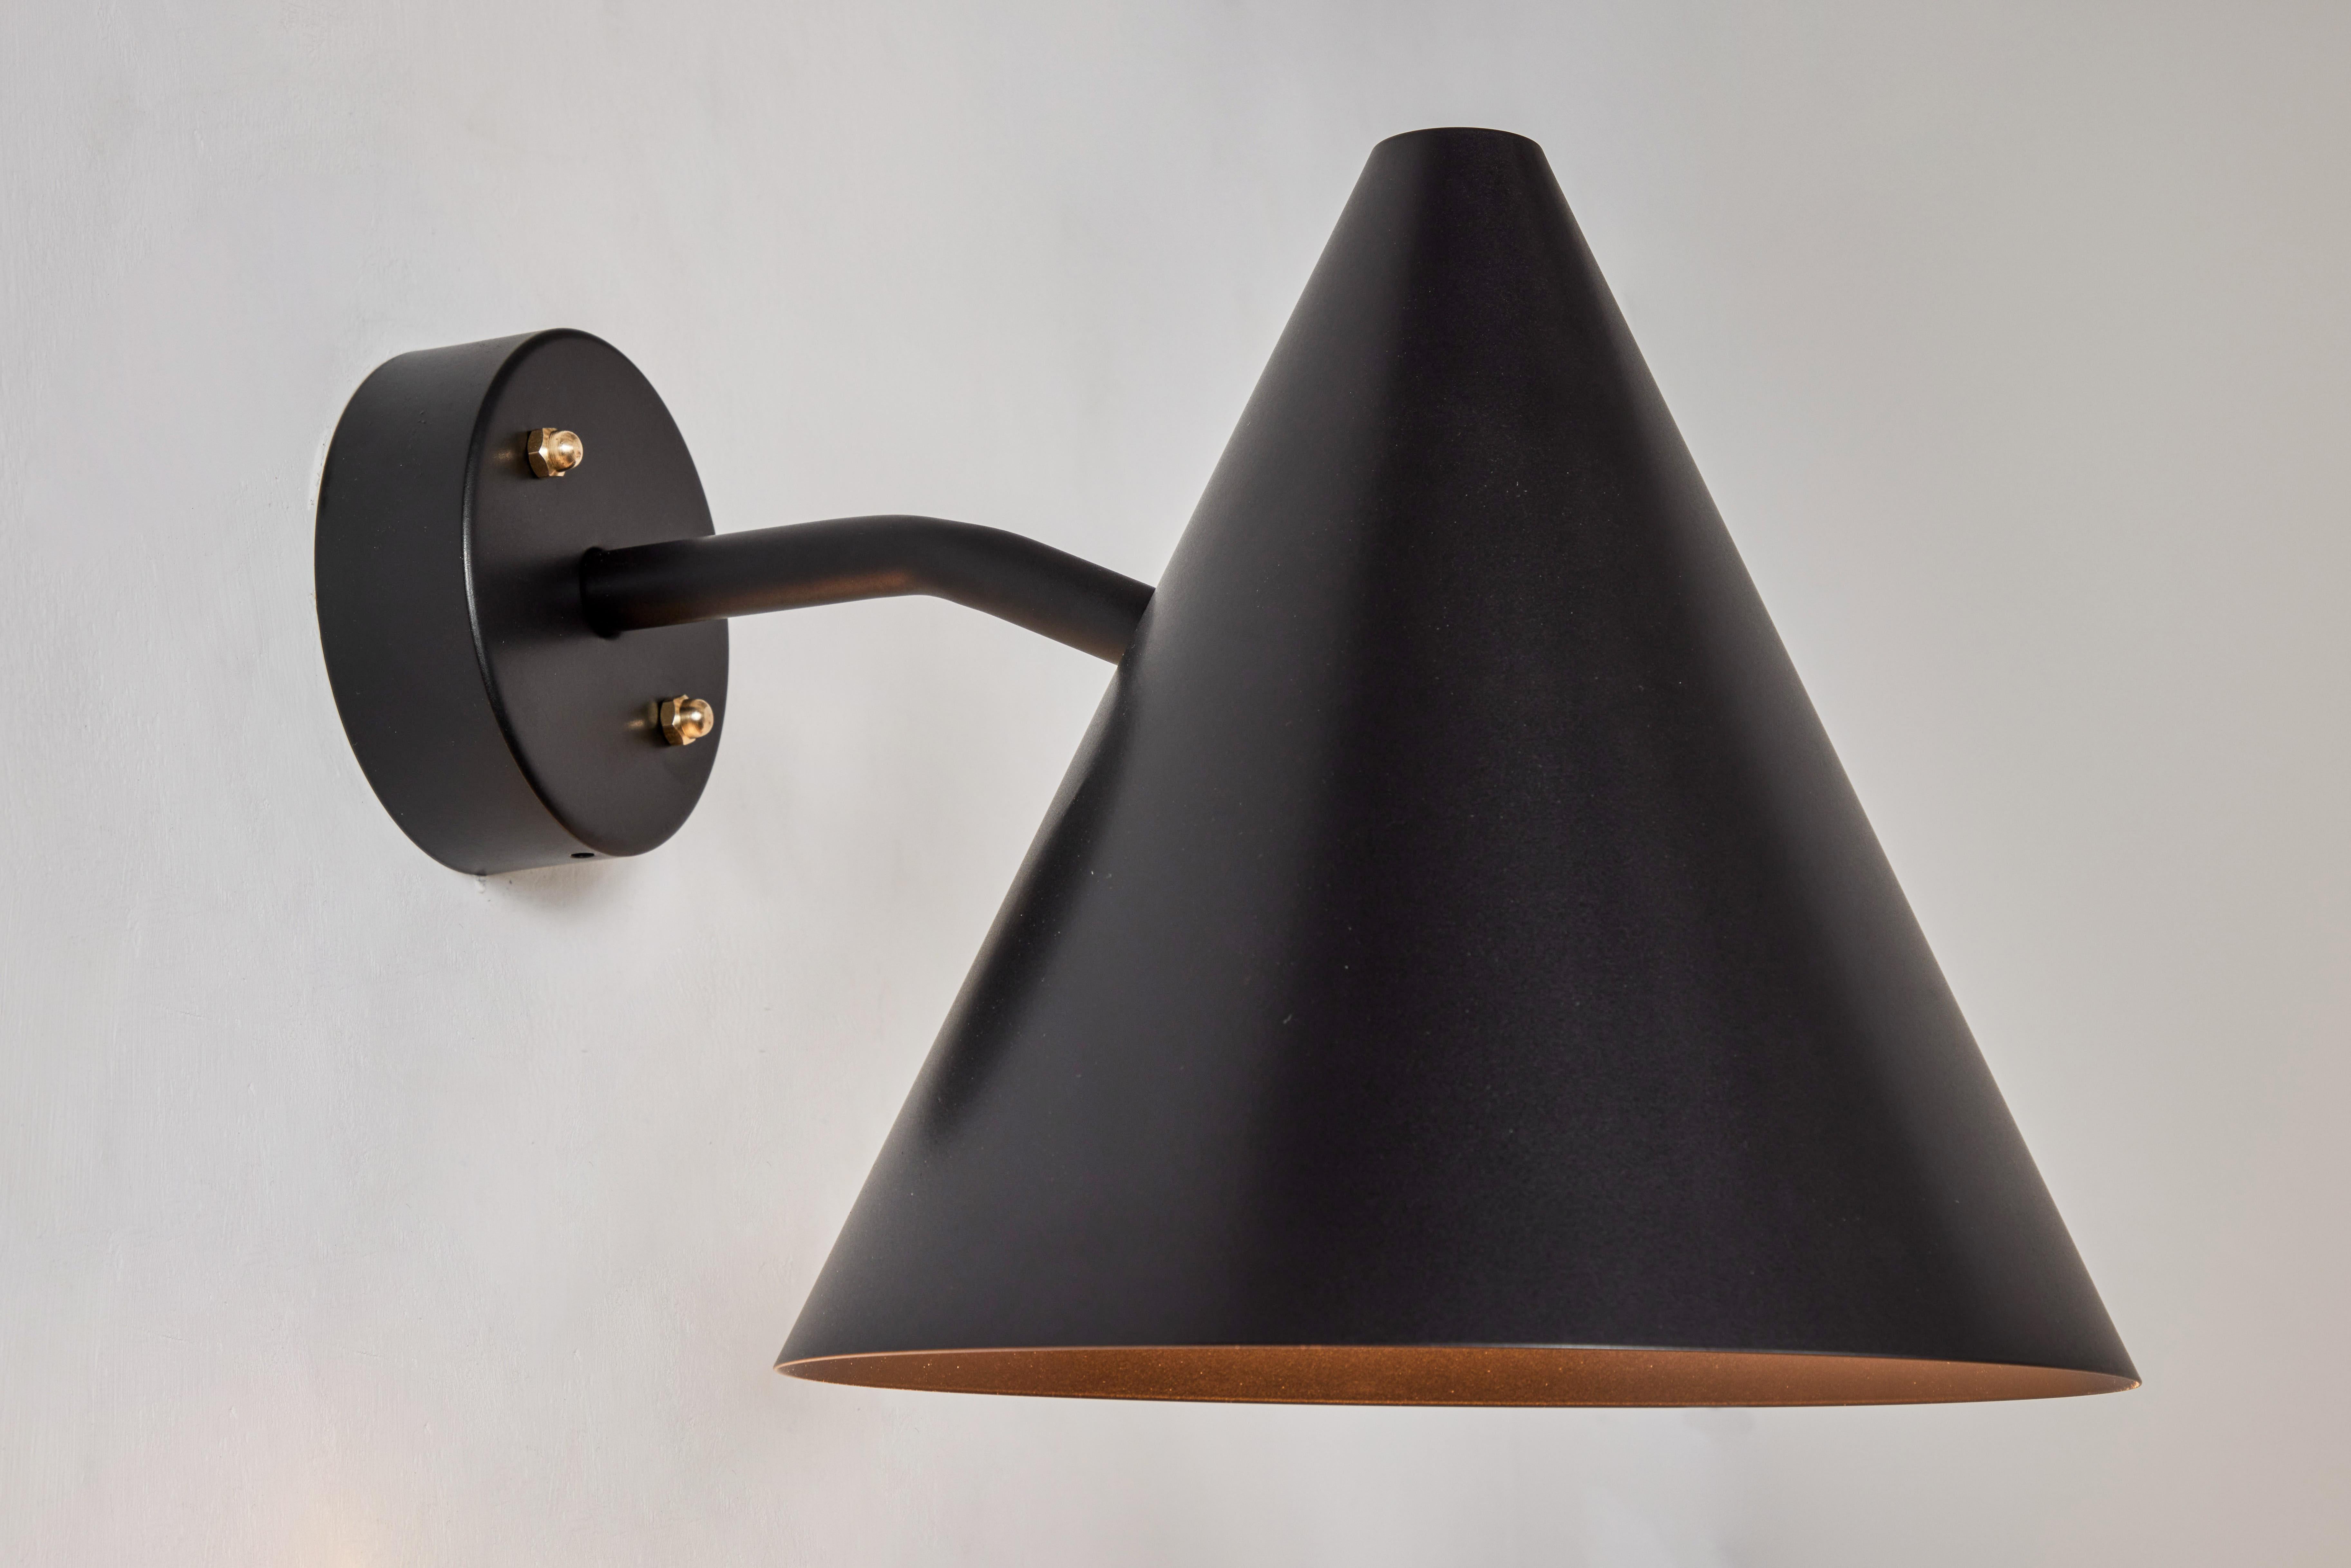 Swedish Pair of Hans-Agne Jakobsson 'Tratten' Outdoor Sconces in Black For Sale